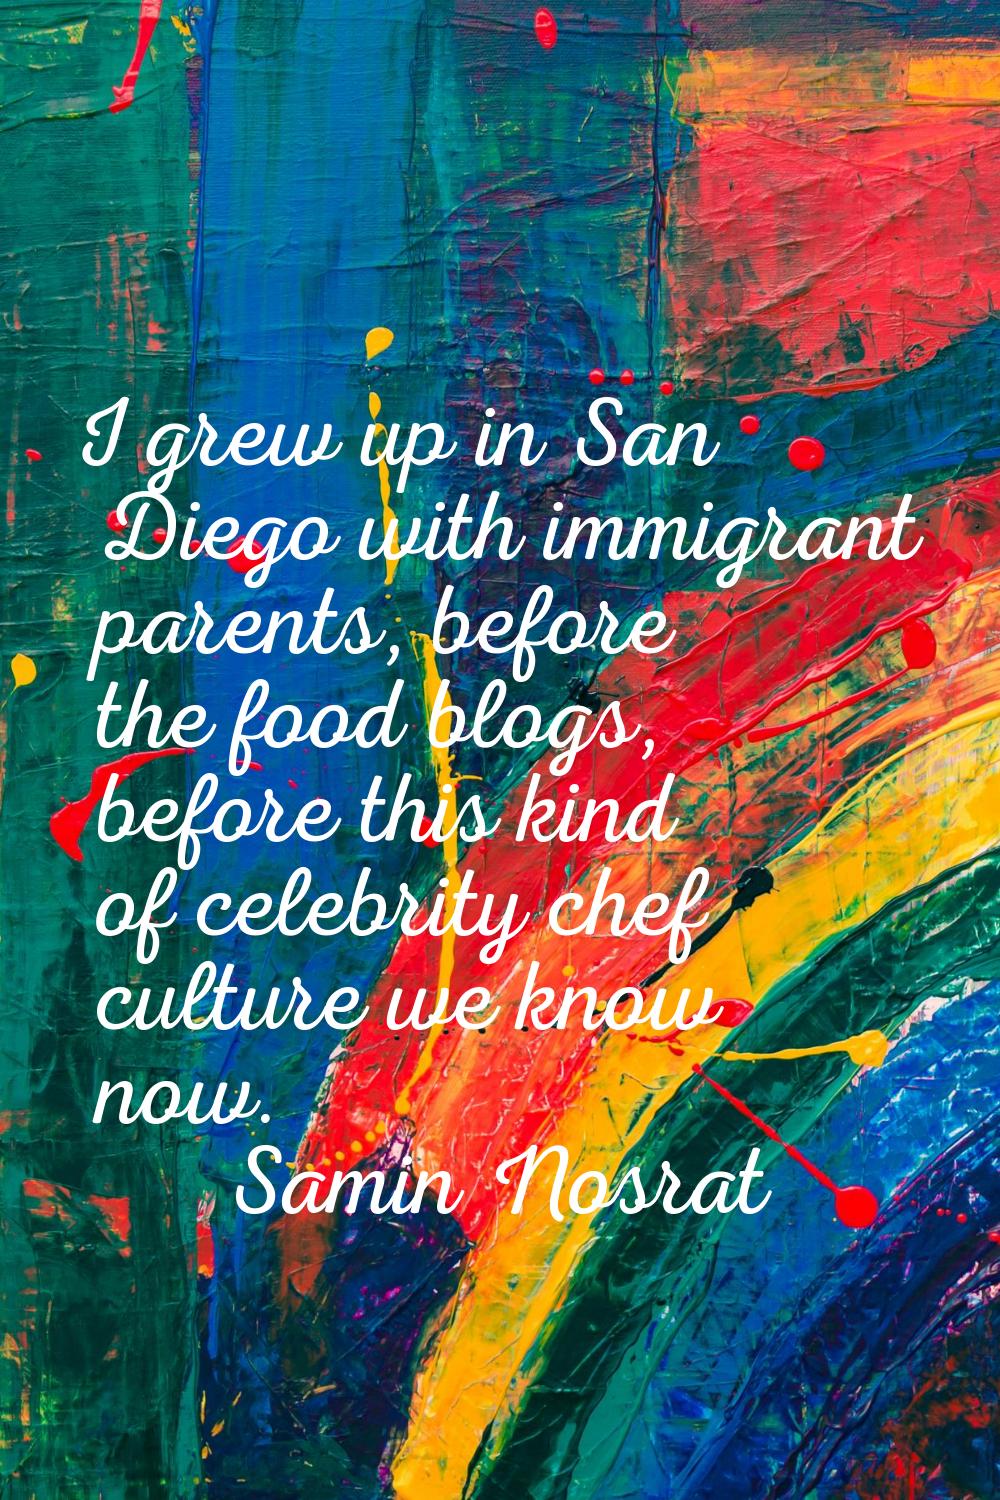 I grew up in San Diego with immigrant parents, before the food blogs, before this kind of celebrity